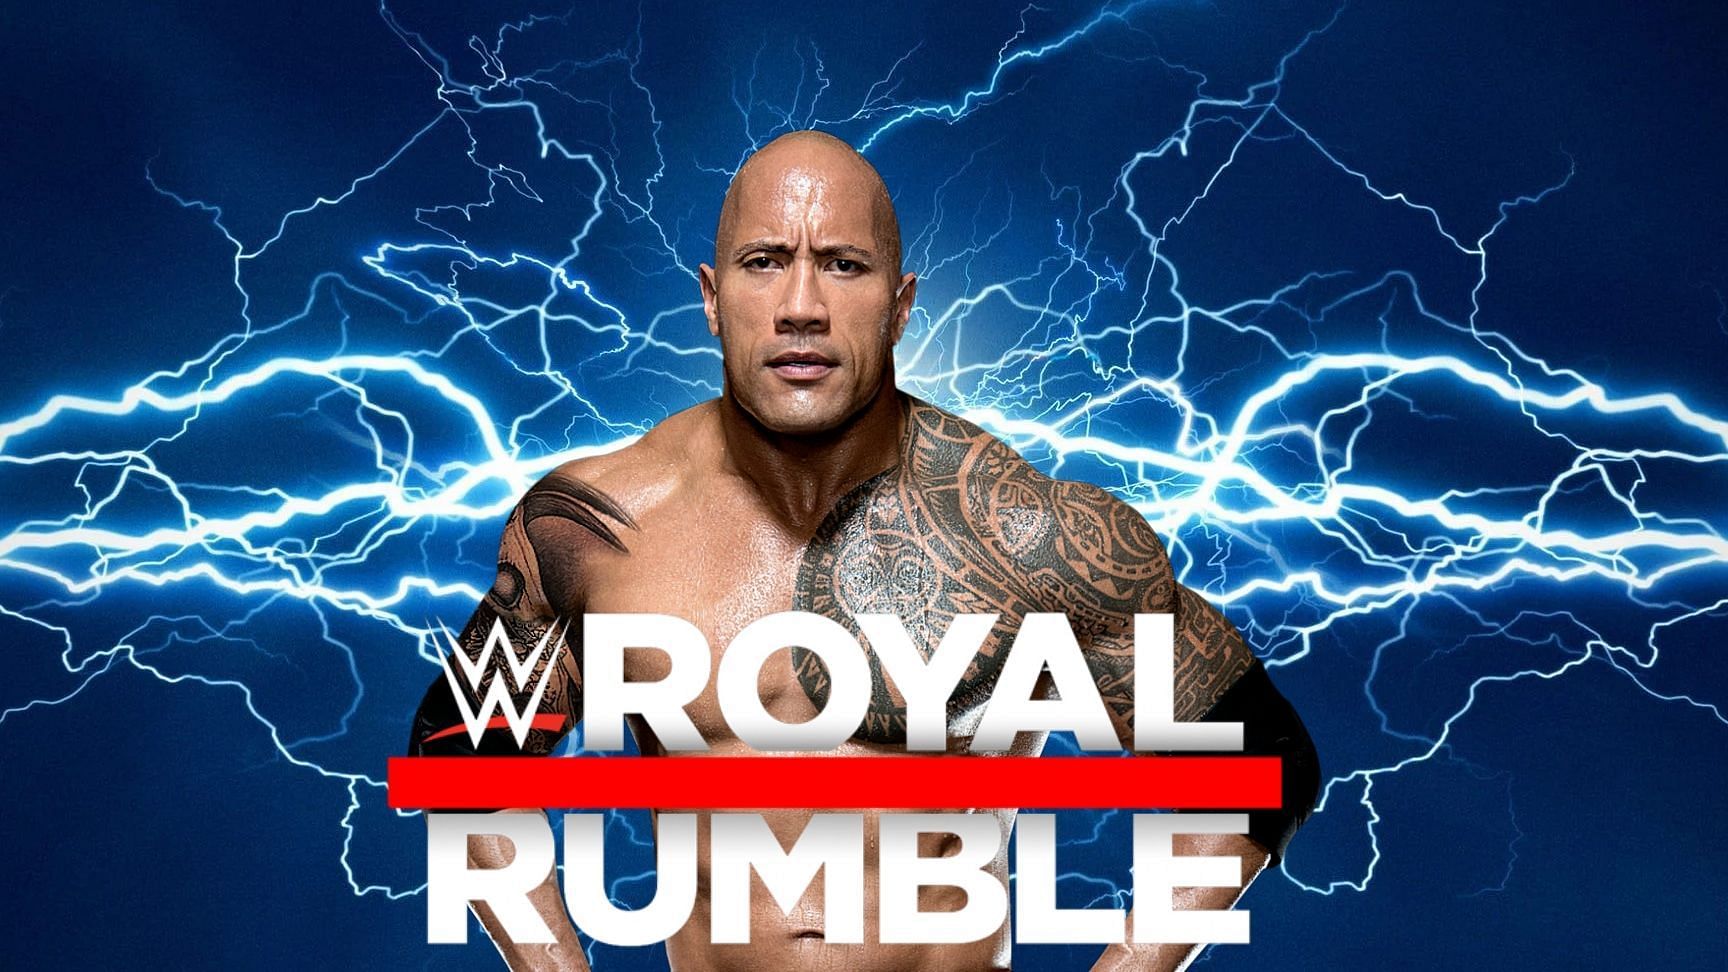 The Rock and former WWE Champion's potential Royal Rumble returns ...